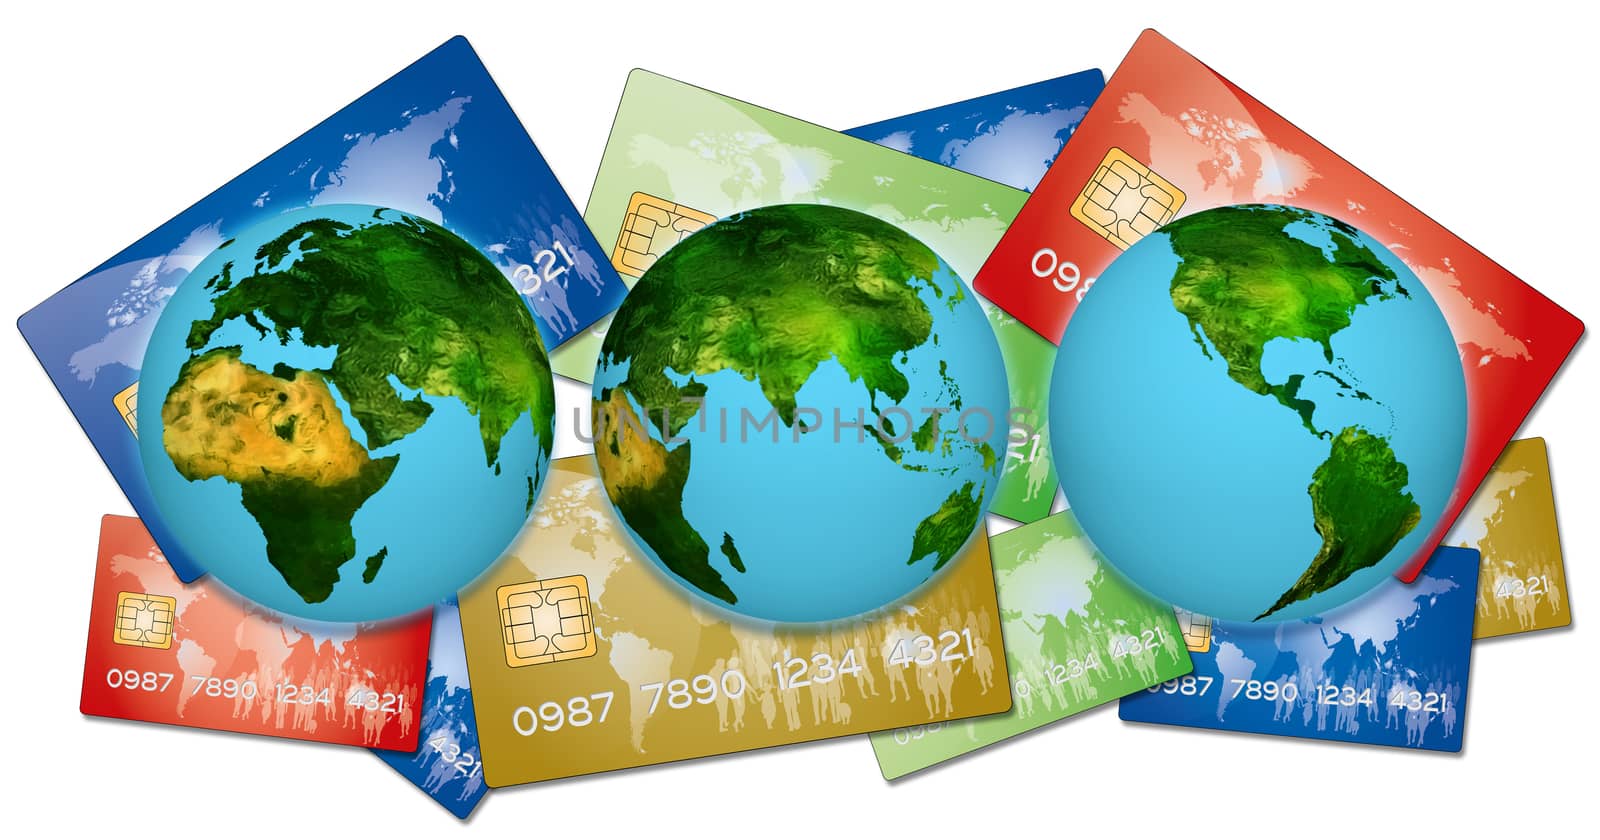 3 Earths representing all countries in the world cards payments by bank loans